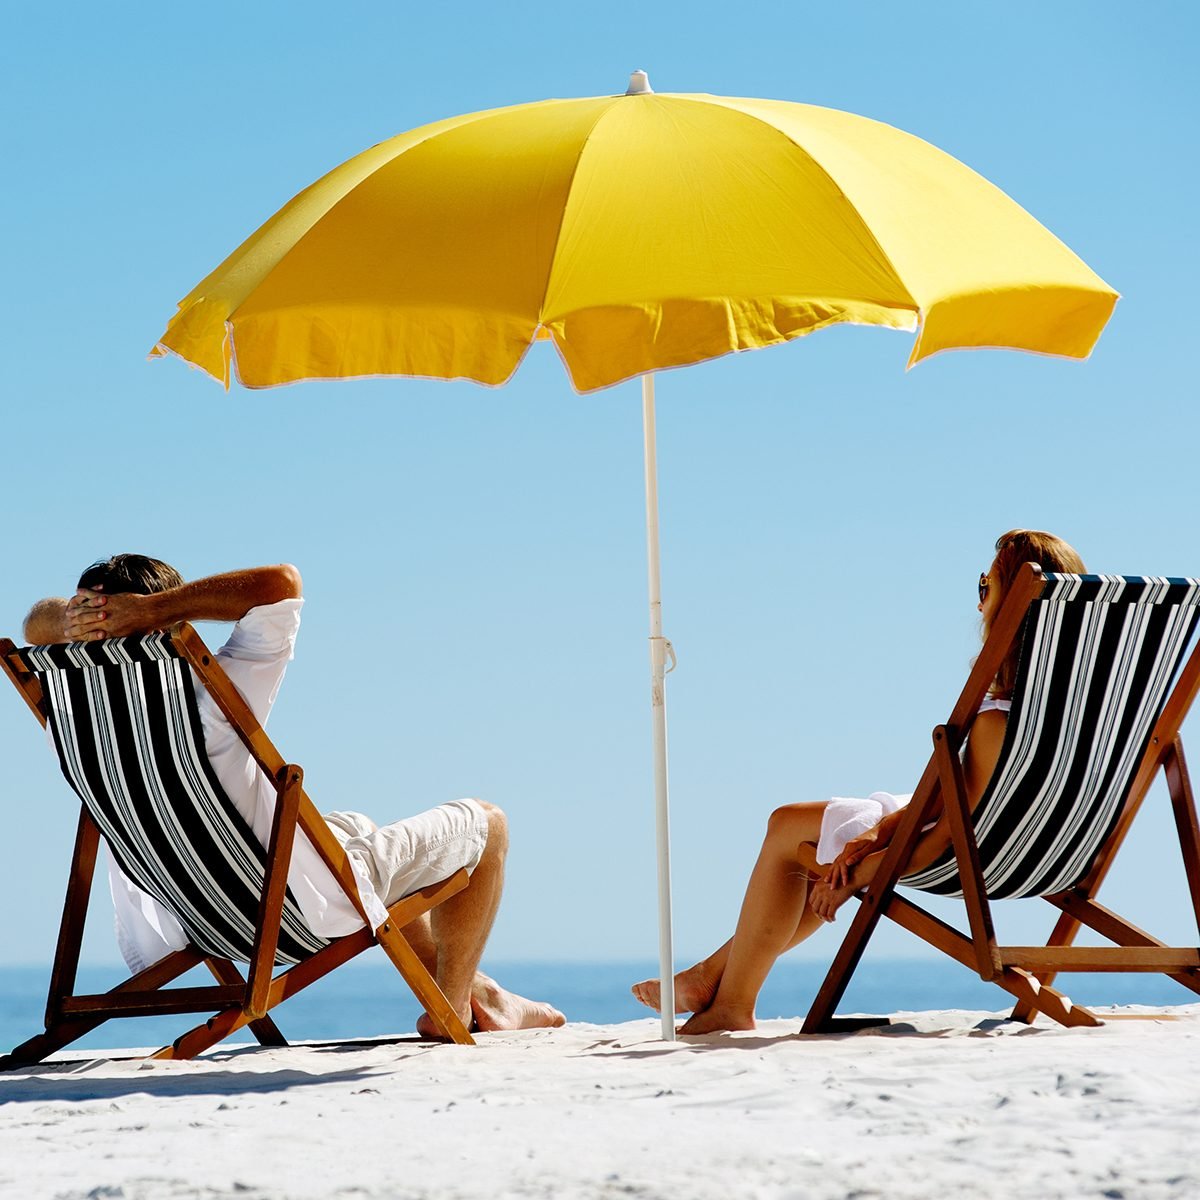 Beach summer couple on island vacation holiday relax in the sun on their deck chairs under a yellow umbrella.